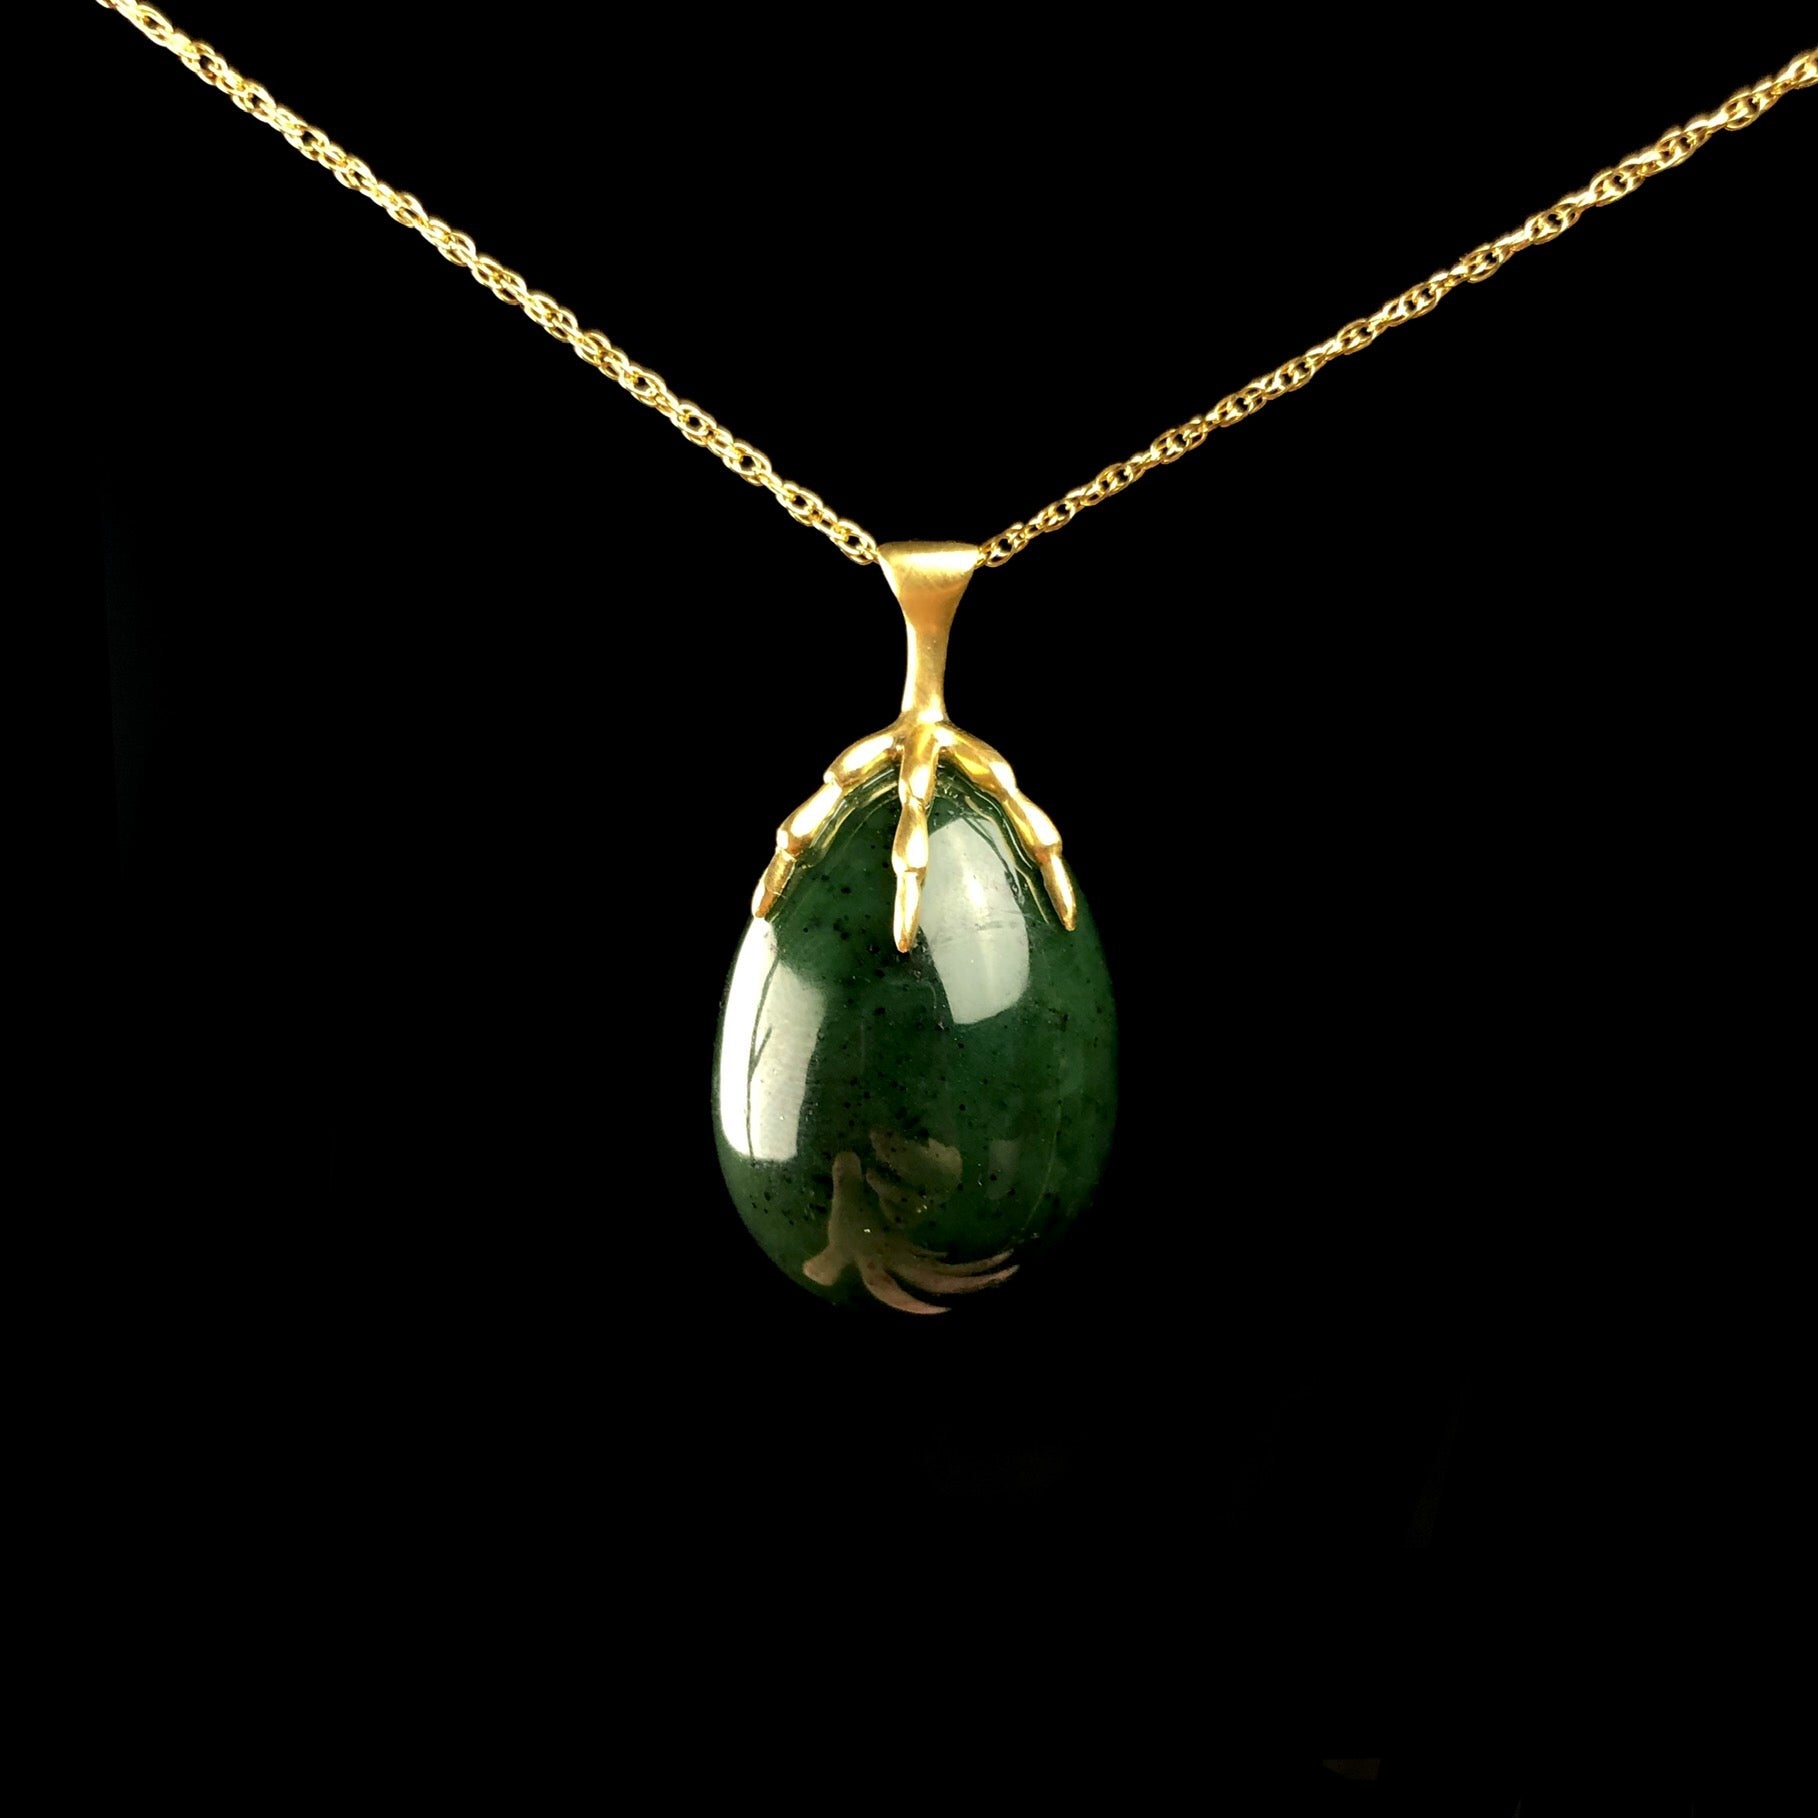 Green egg shaped stone held by a gold bird claw on gold chain